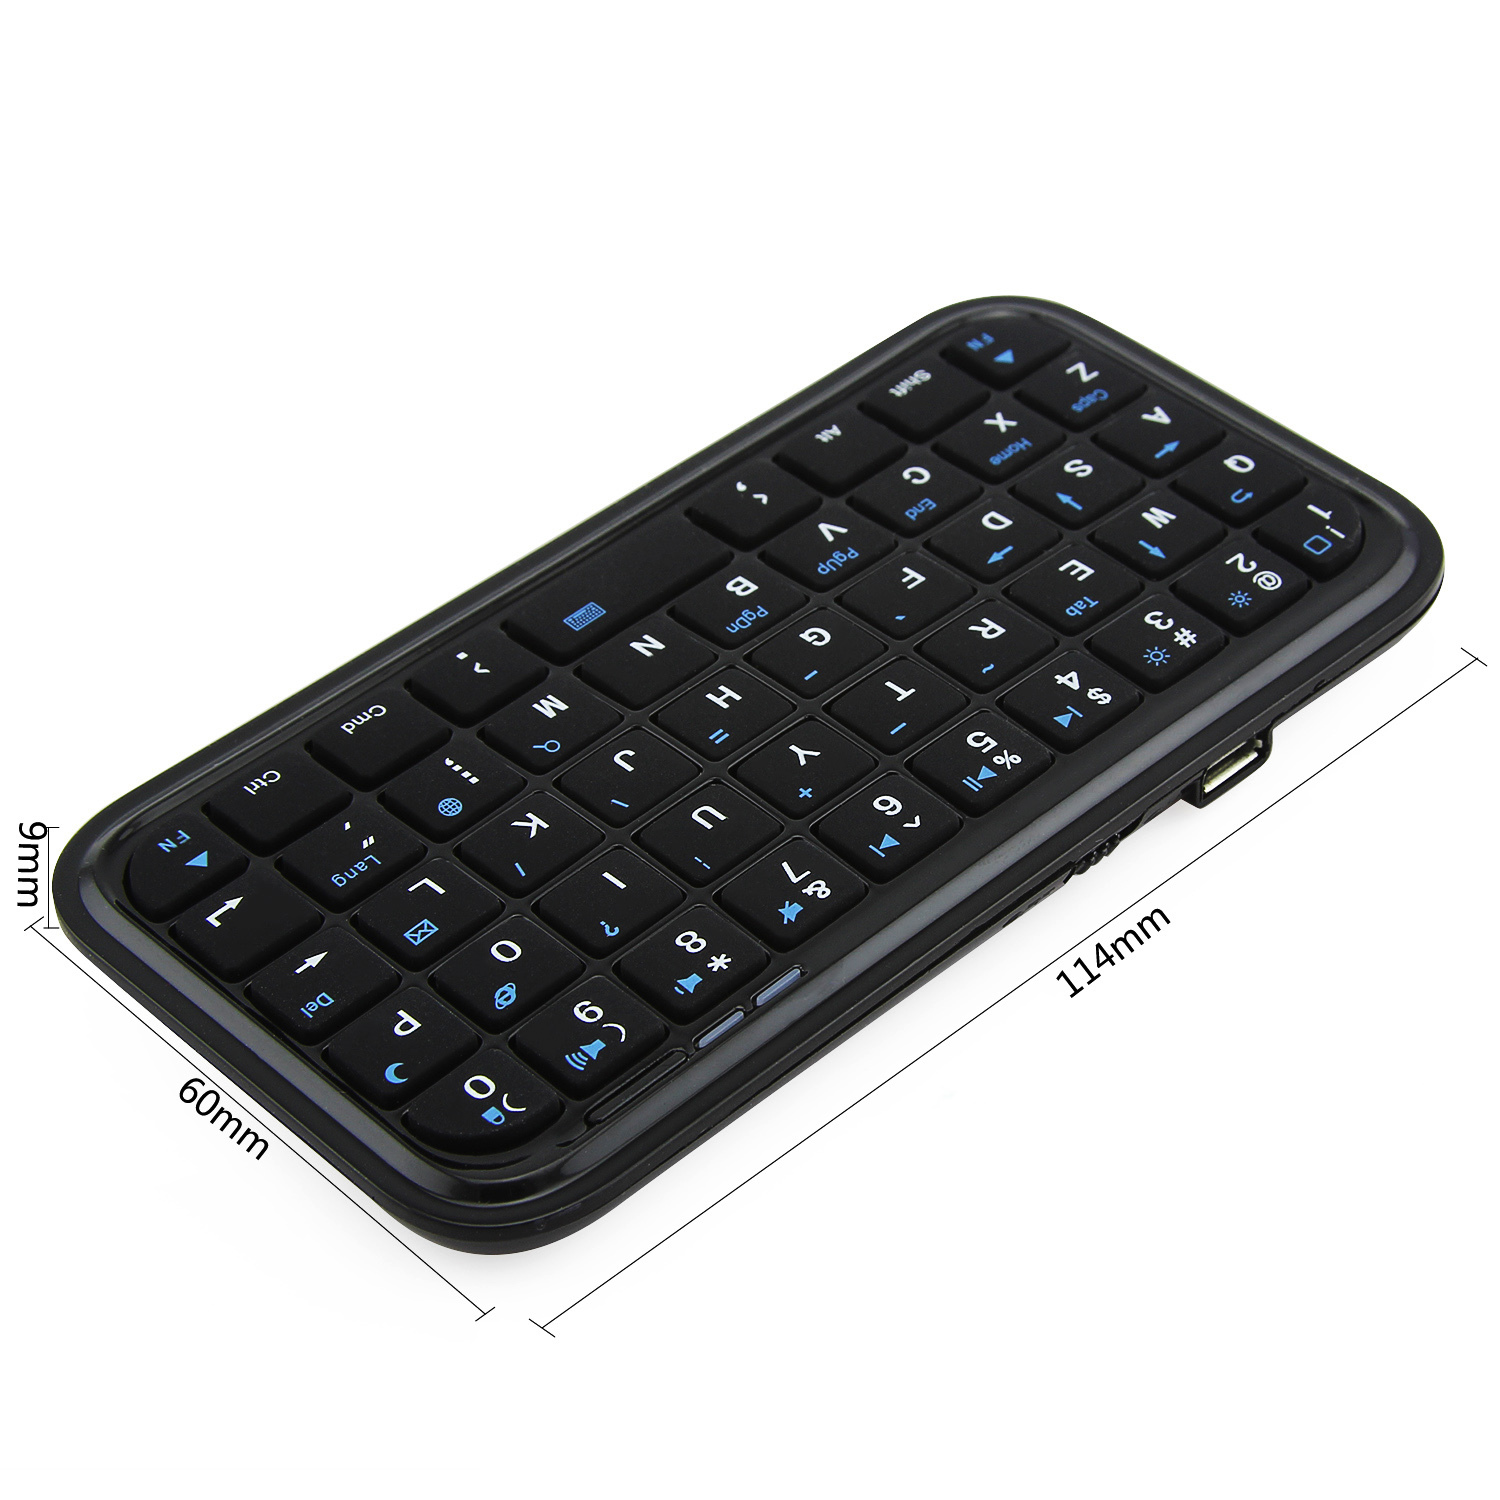 Bluetooth-Wireless-Mini-Keyboard-Slim-Black-Computer-Portable-Small-Hand-Keypad-For-iPhone-Android-Smart-Phone (2)